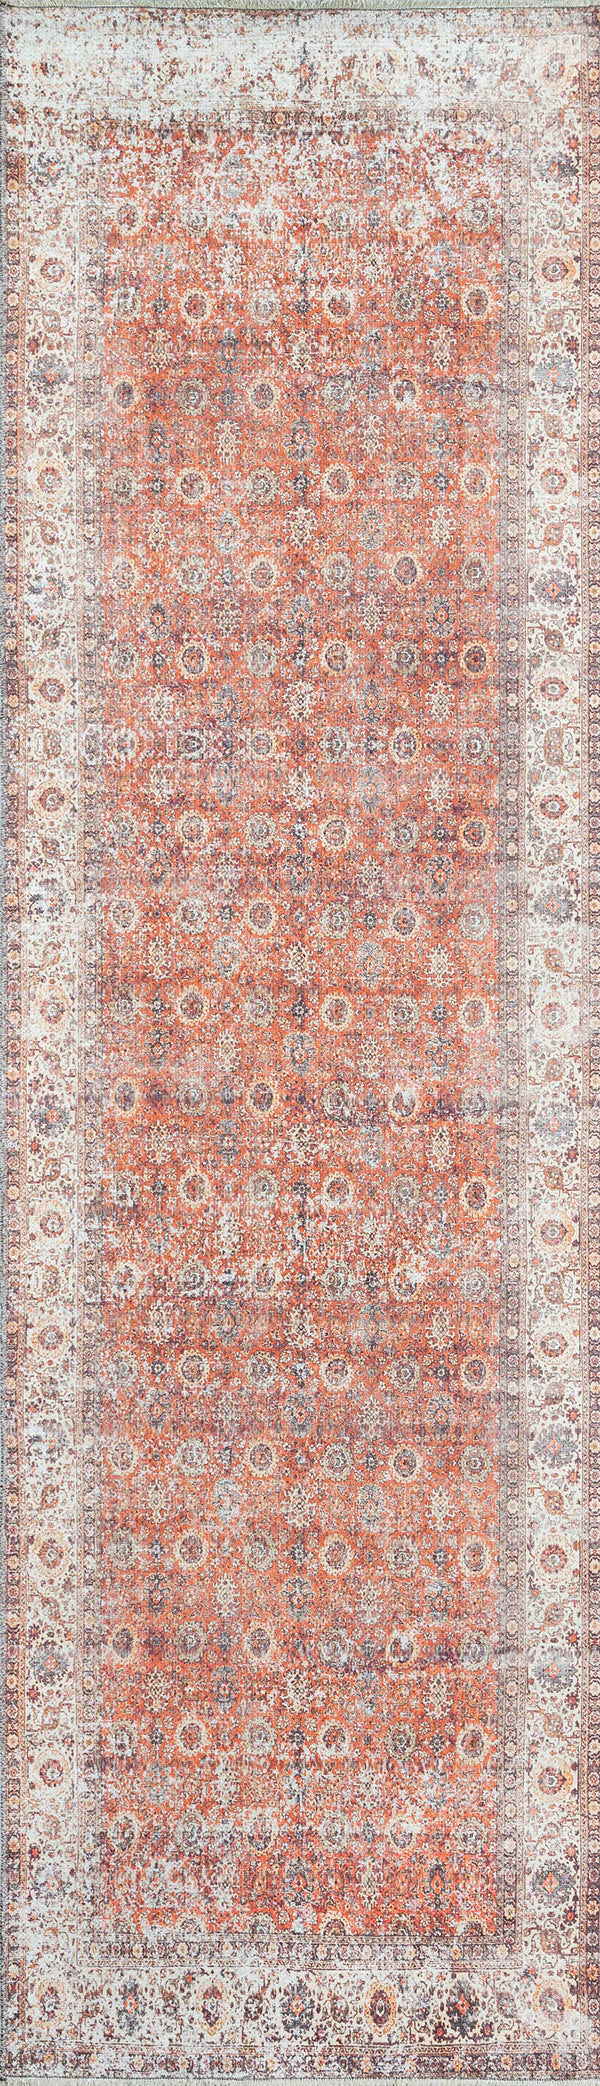 Red Traditional Area Rug - AR6138